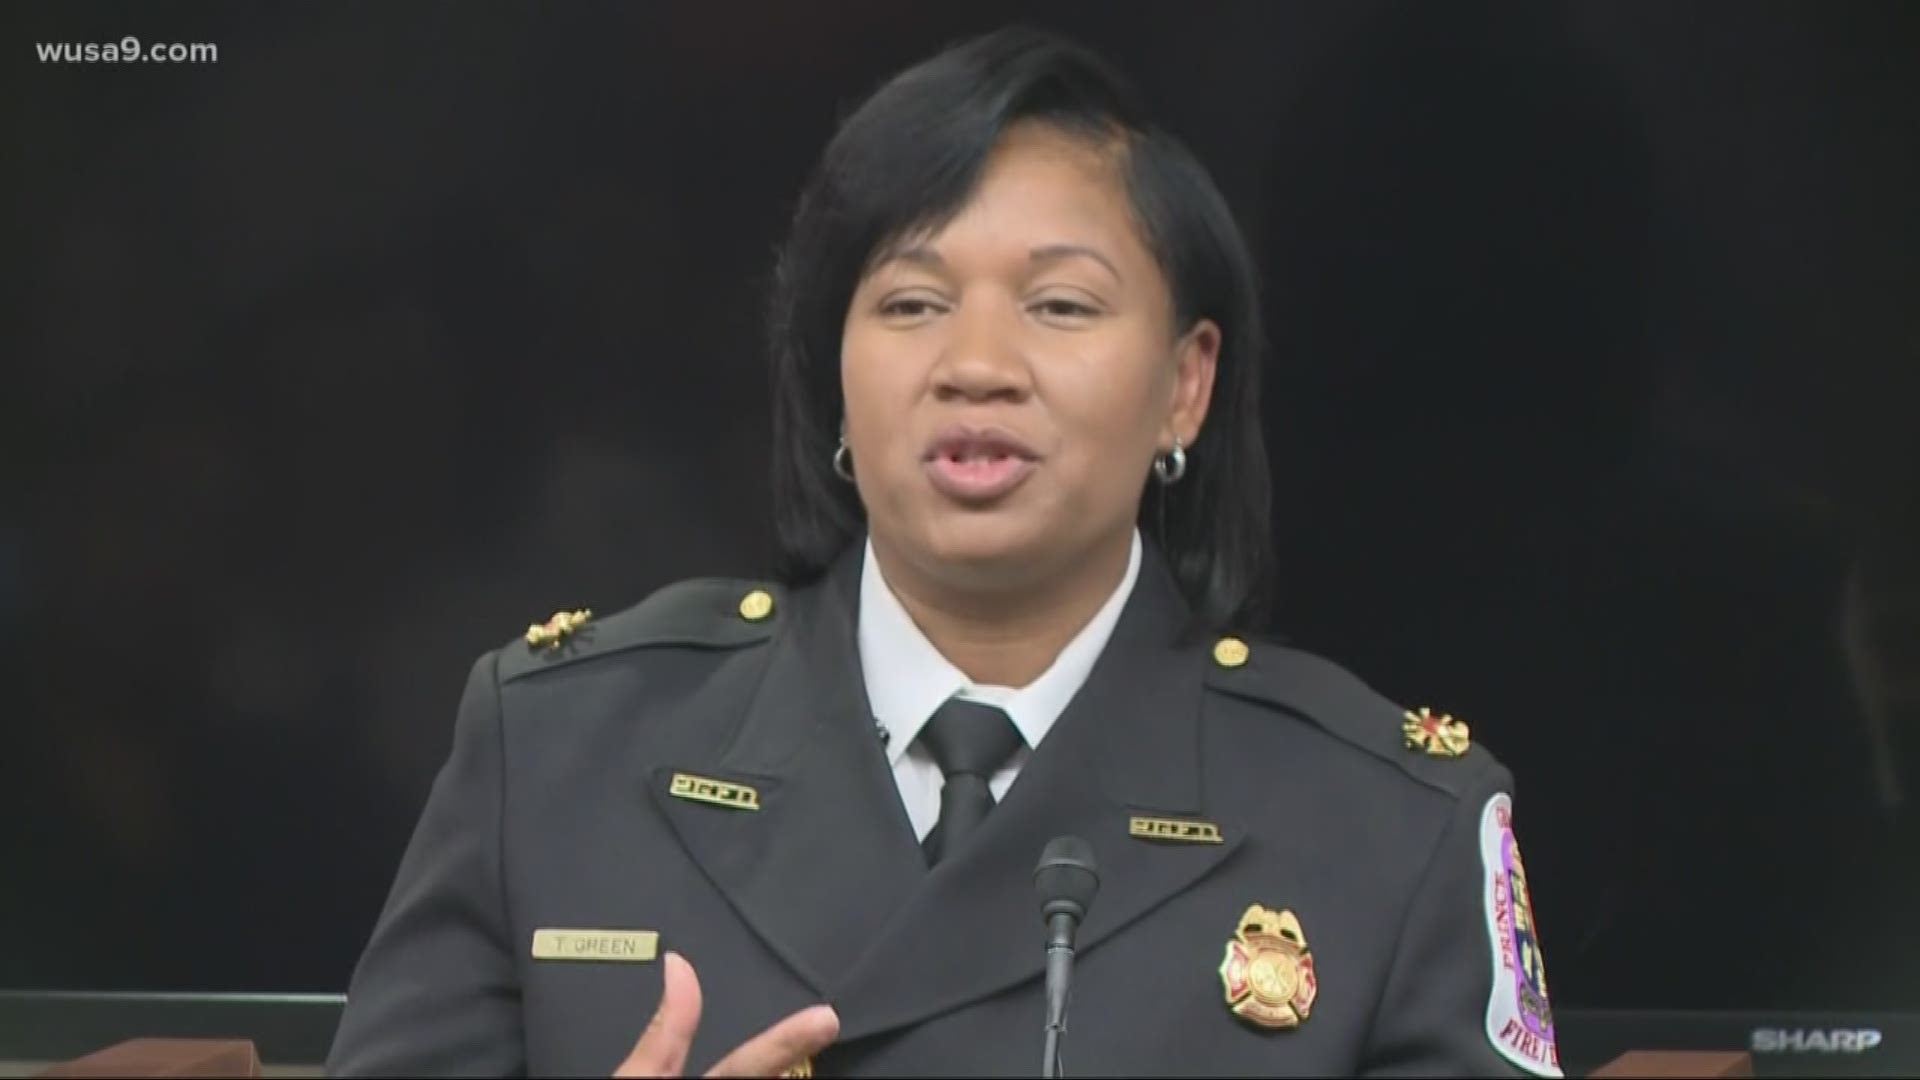 County Executive Angela Alsobrooks announced Chief Deputy Tiffany Green will be the interim replacement for Chief Benjamin Barksdale who is retiring.